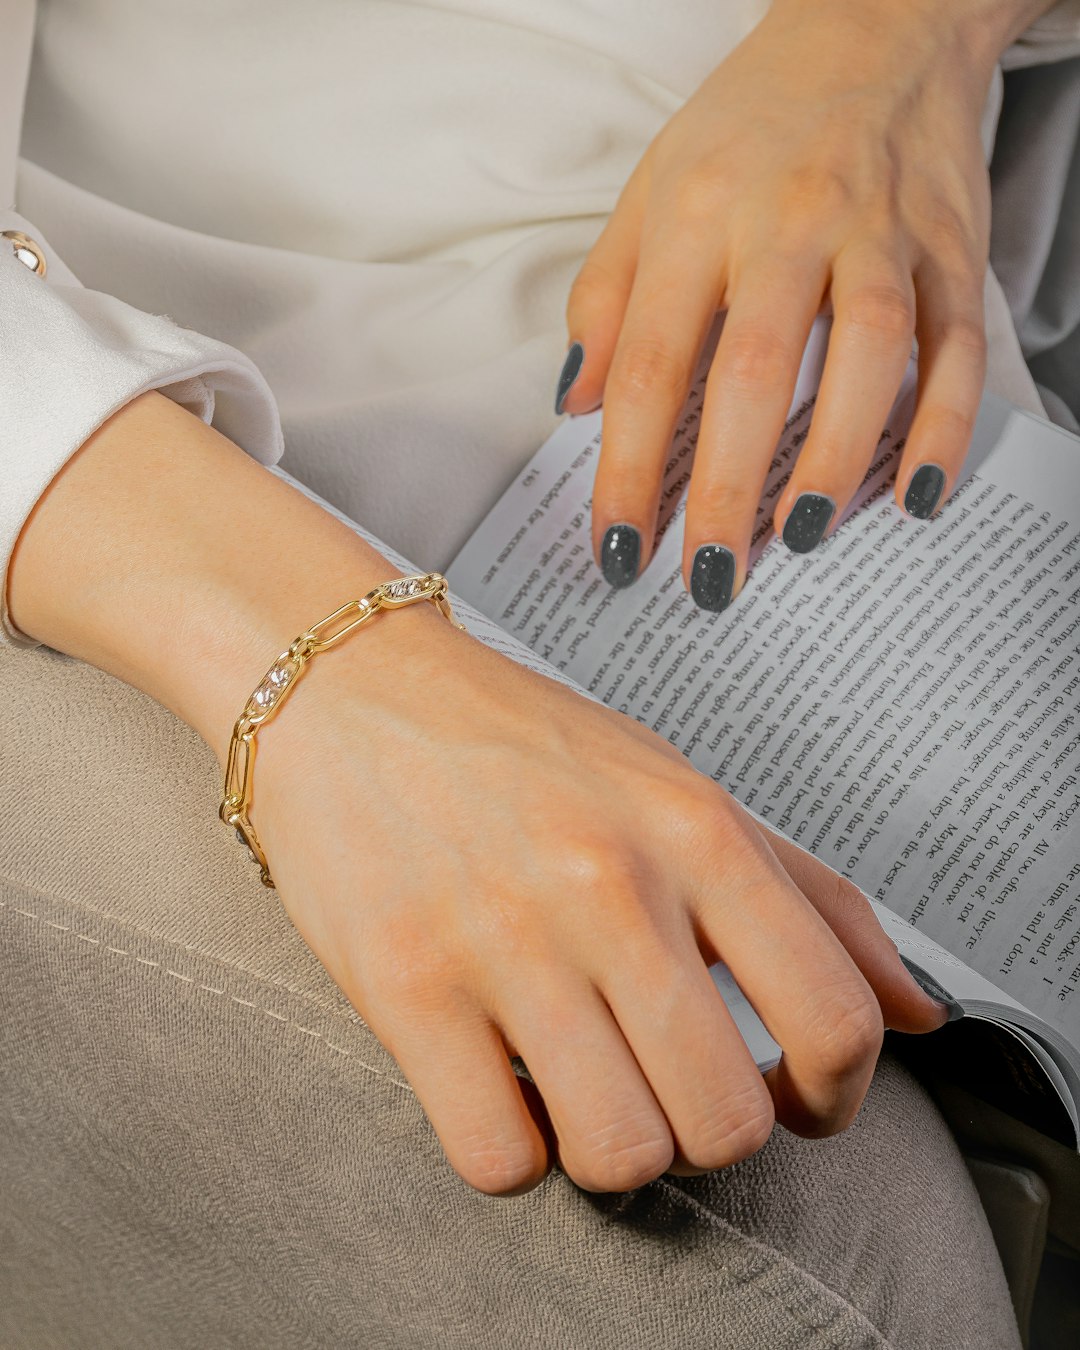 person wearing gold bracelet and white long sleeve shirt